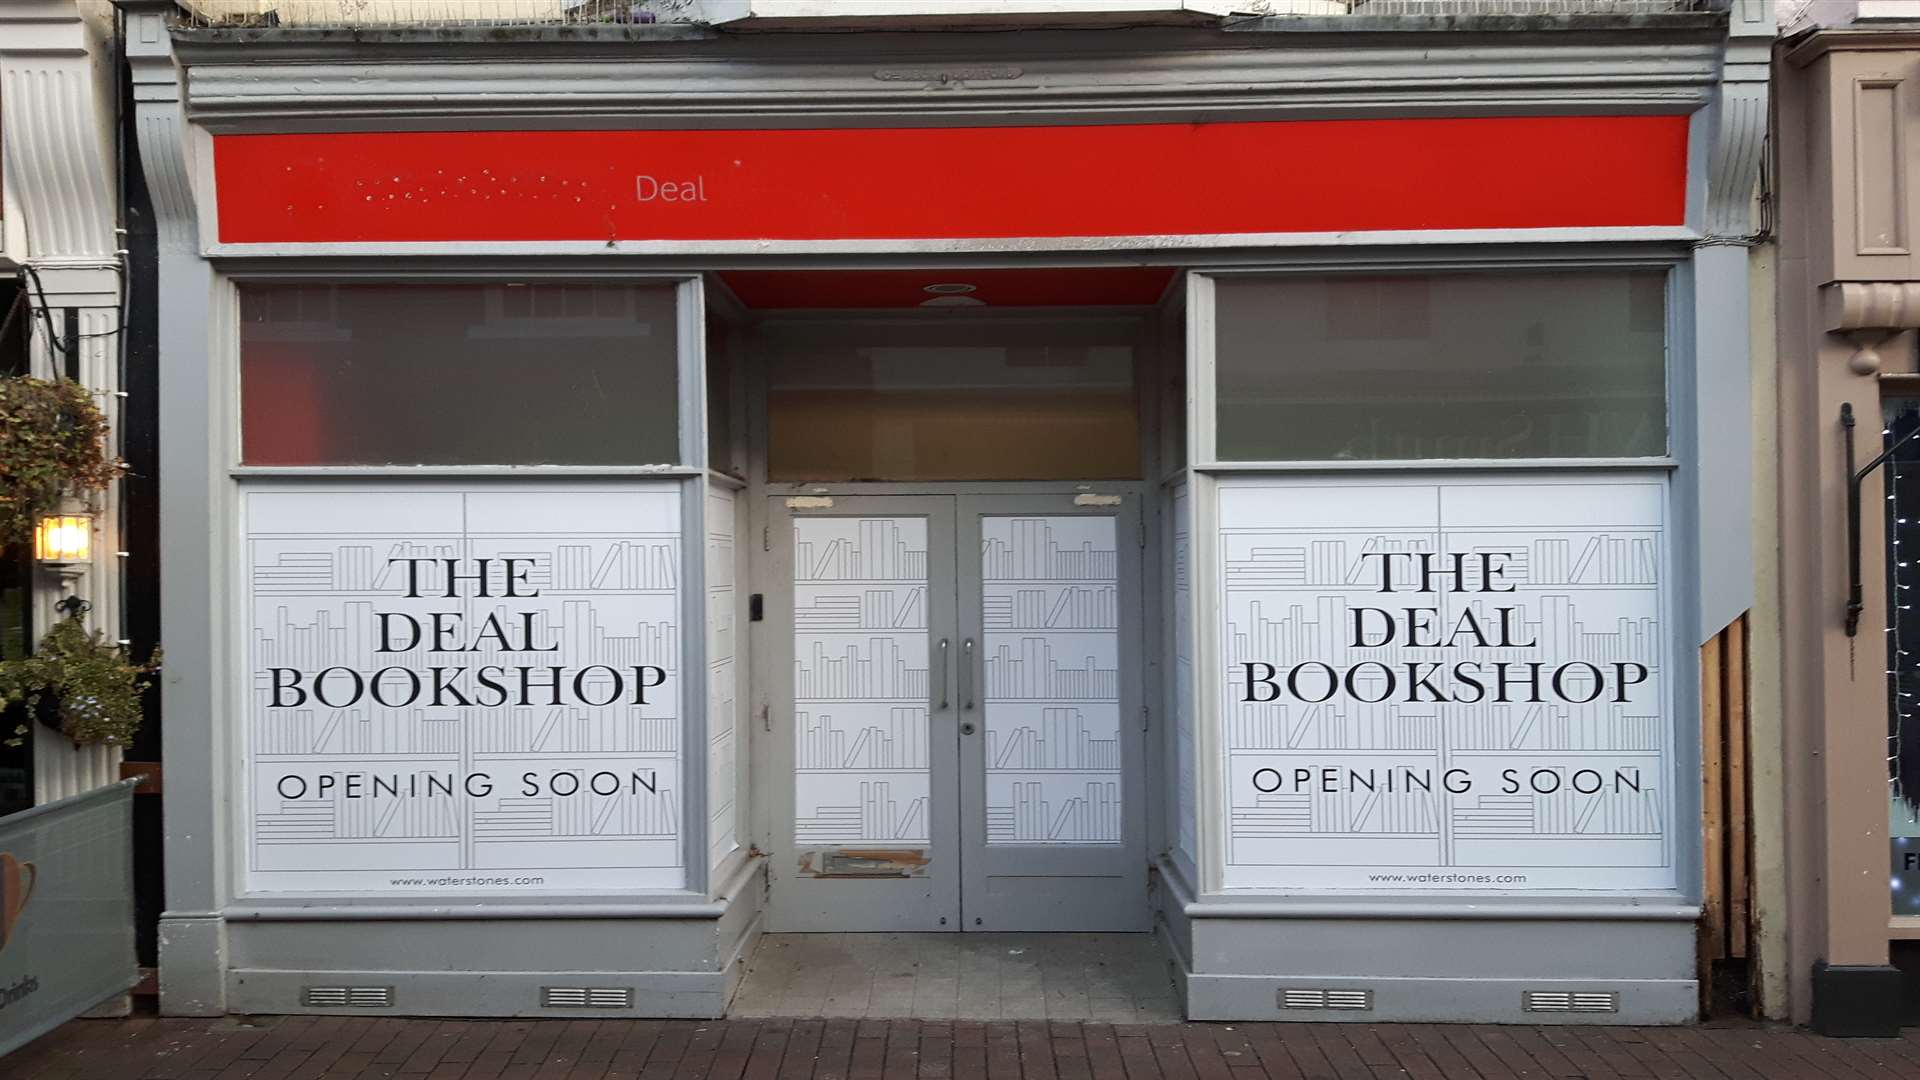 Coming soon: The Deal Bookshop